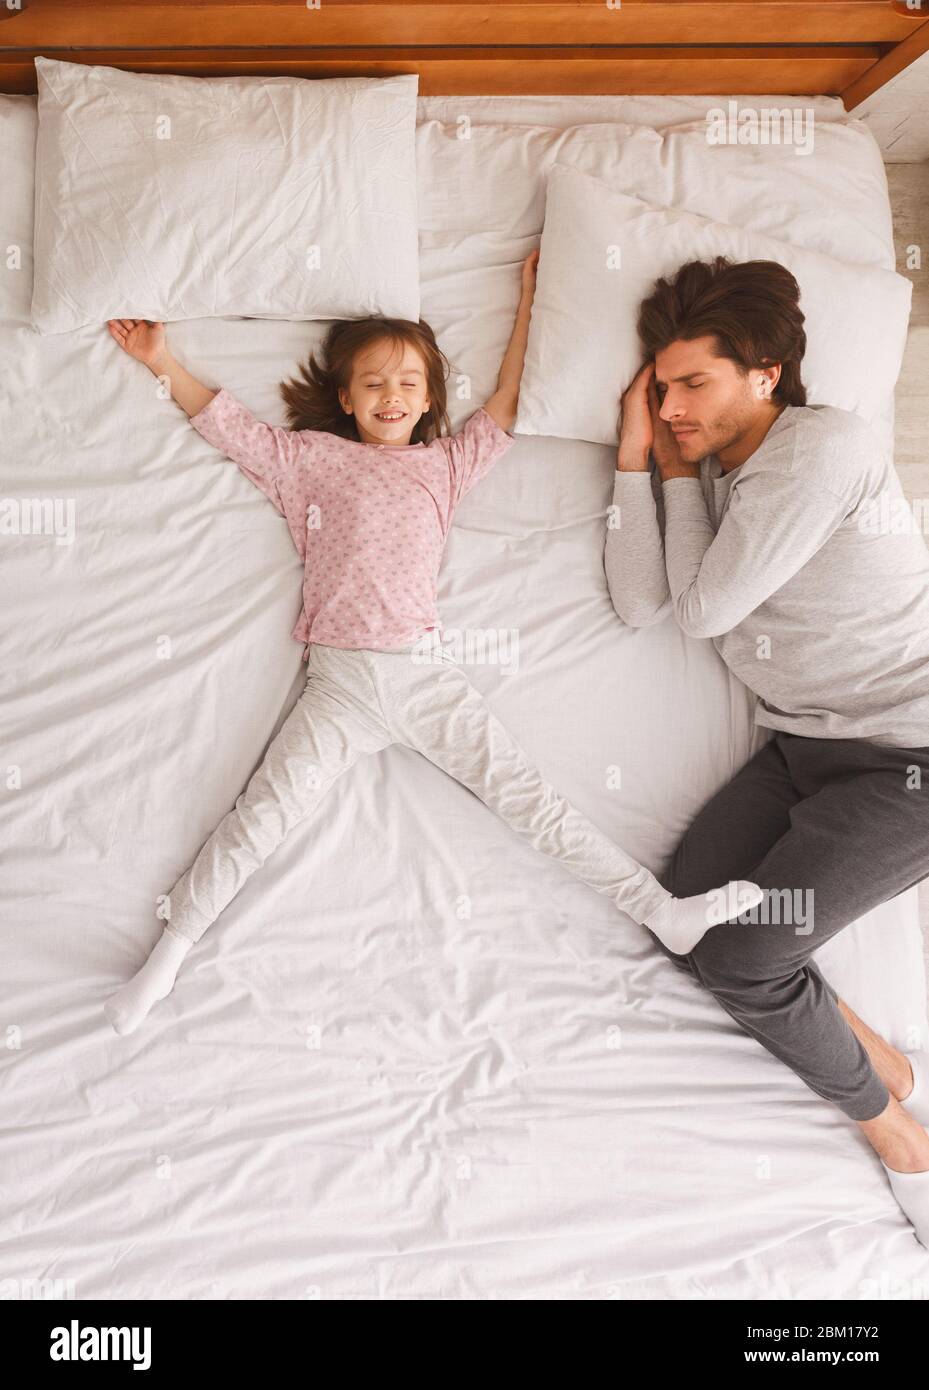 Father and little daughter sleeping together on bed Stock Photo - Alamy